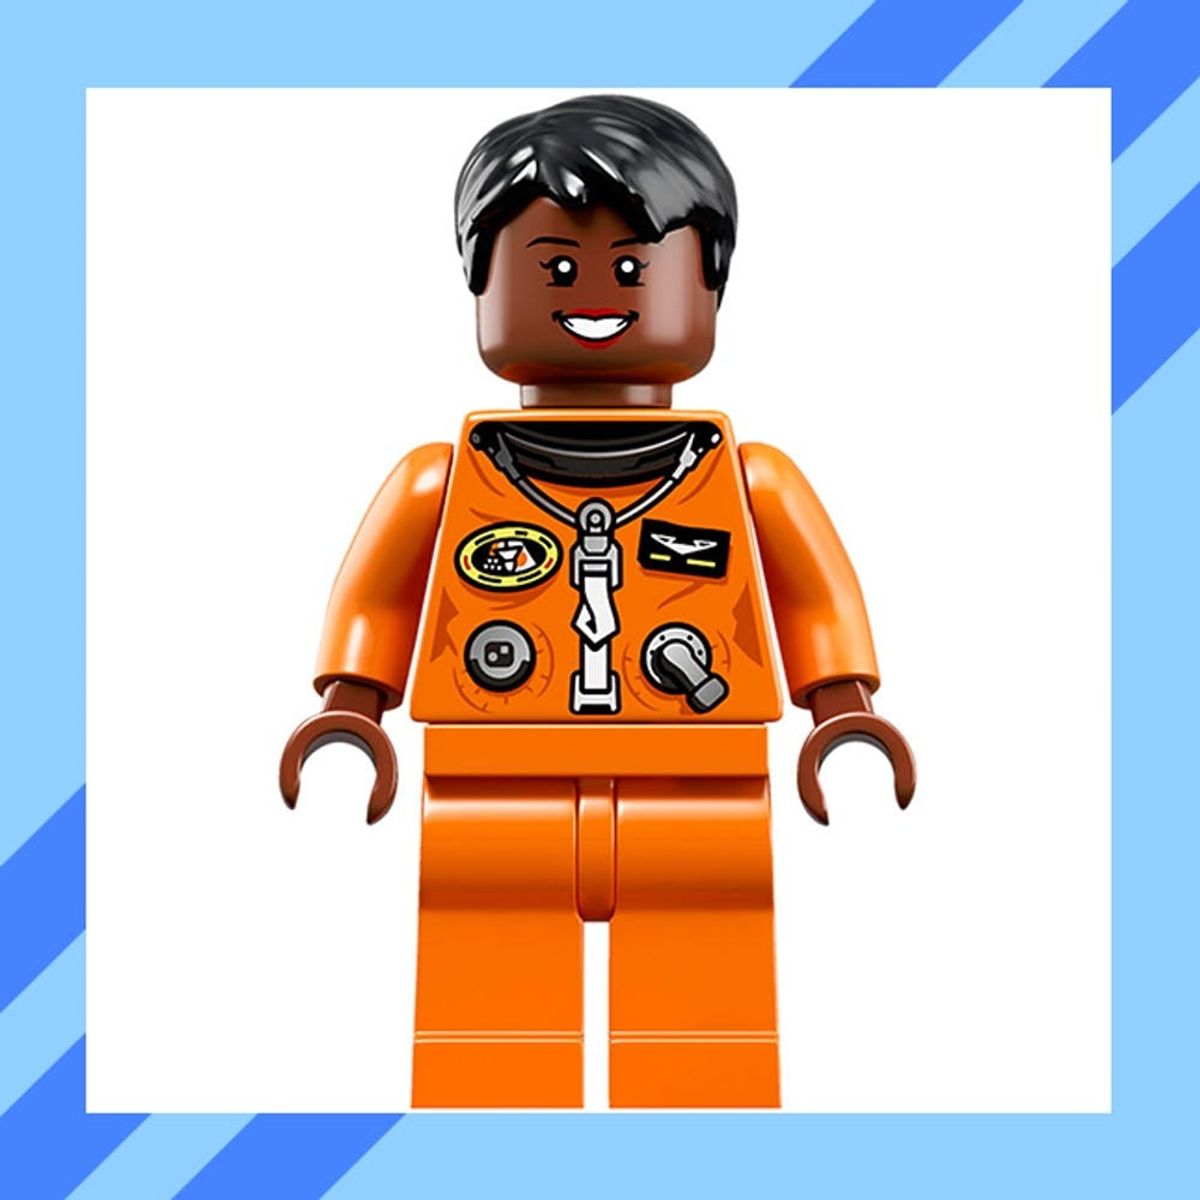 The New “Women of NASA” LEGO Set Is Out-of-This-World Perfection